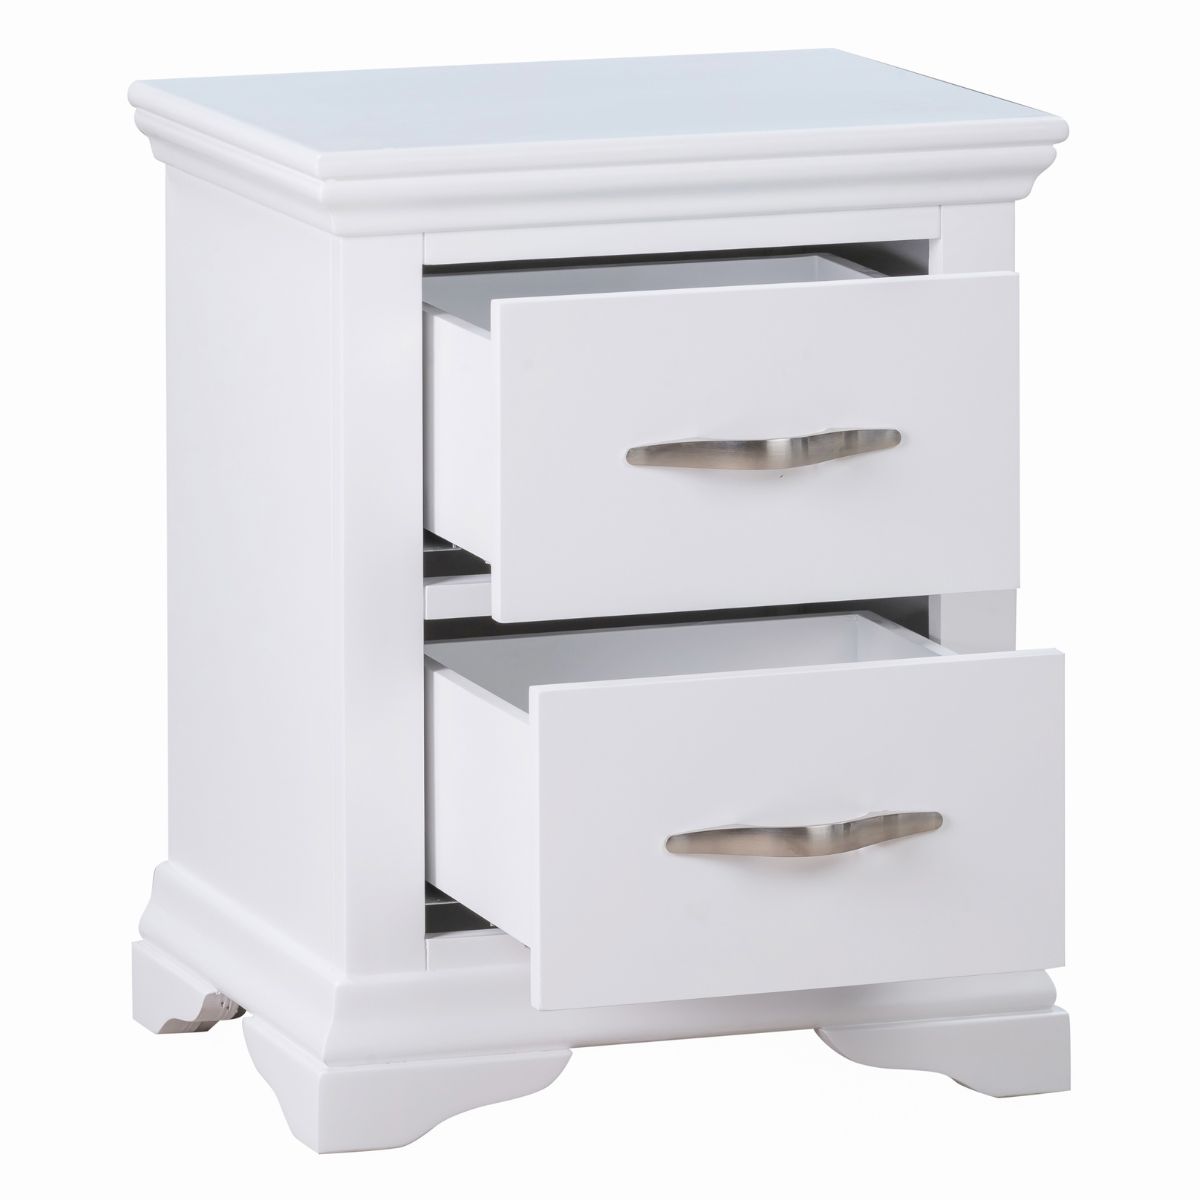 Lucilla White Wooden Bedside Table - 3